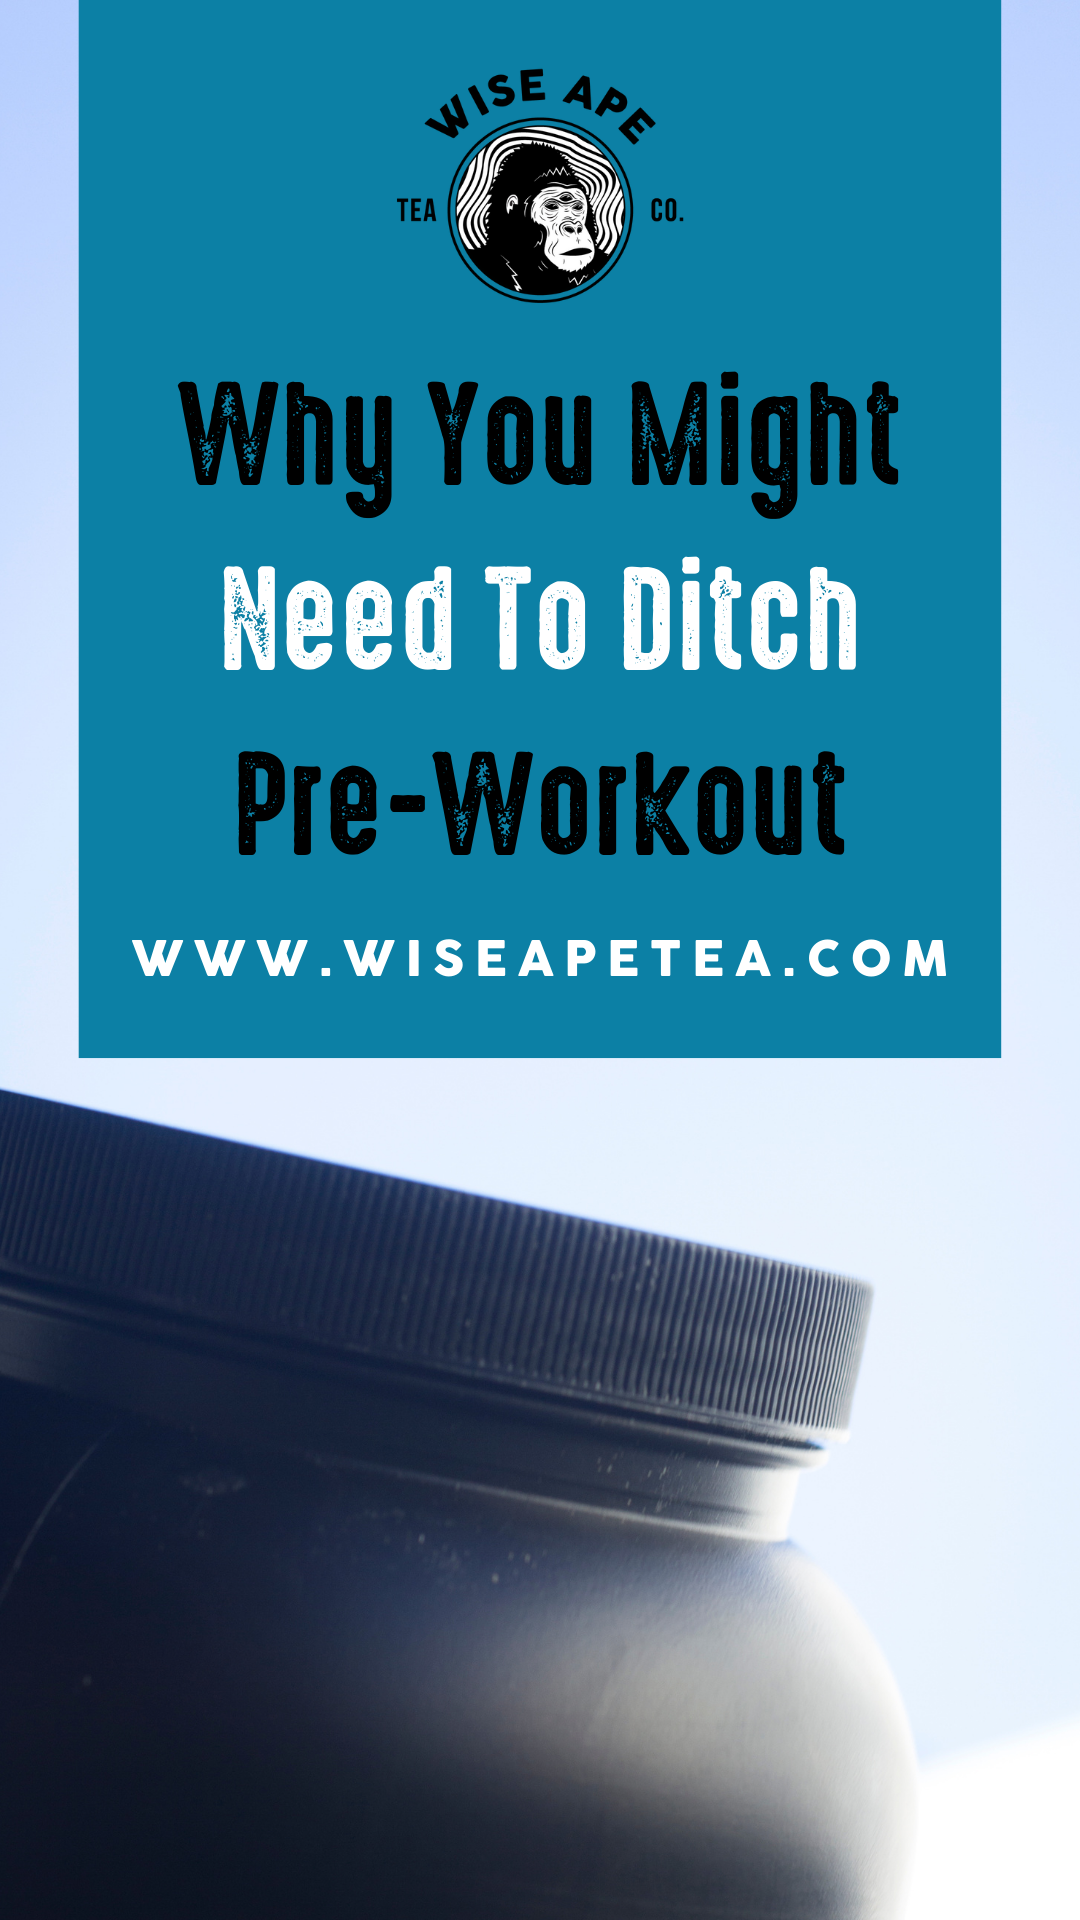 WHY YOU MIGHT NEED TO DITCH PRE WORKOUT